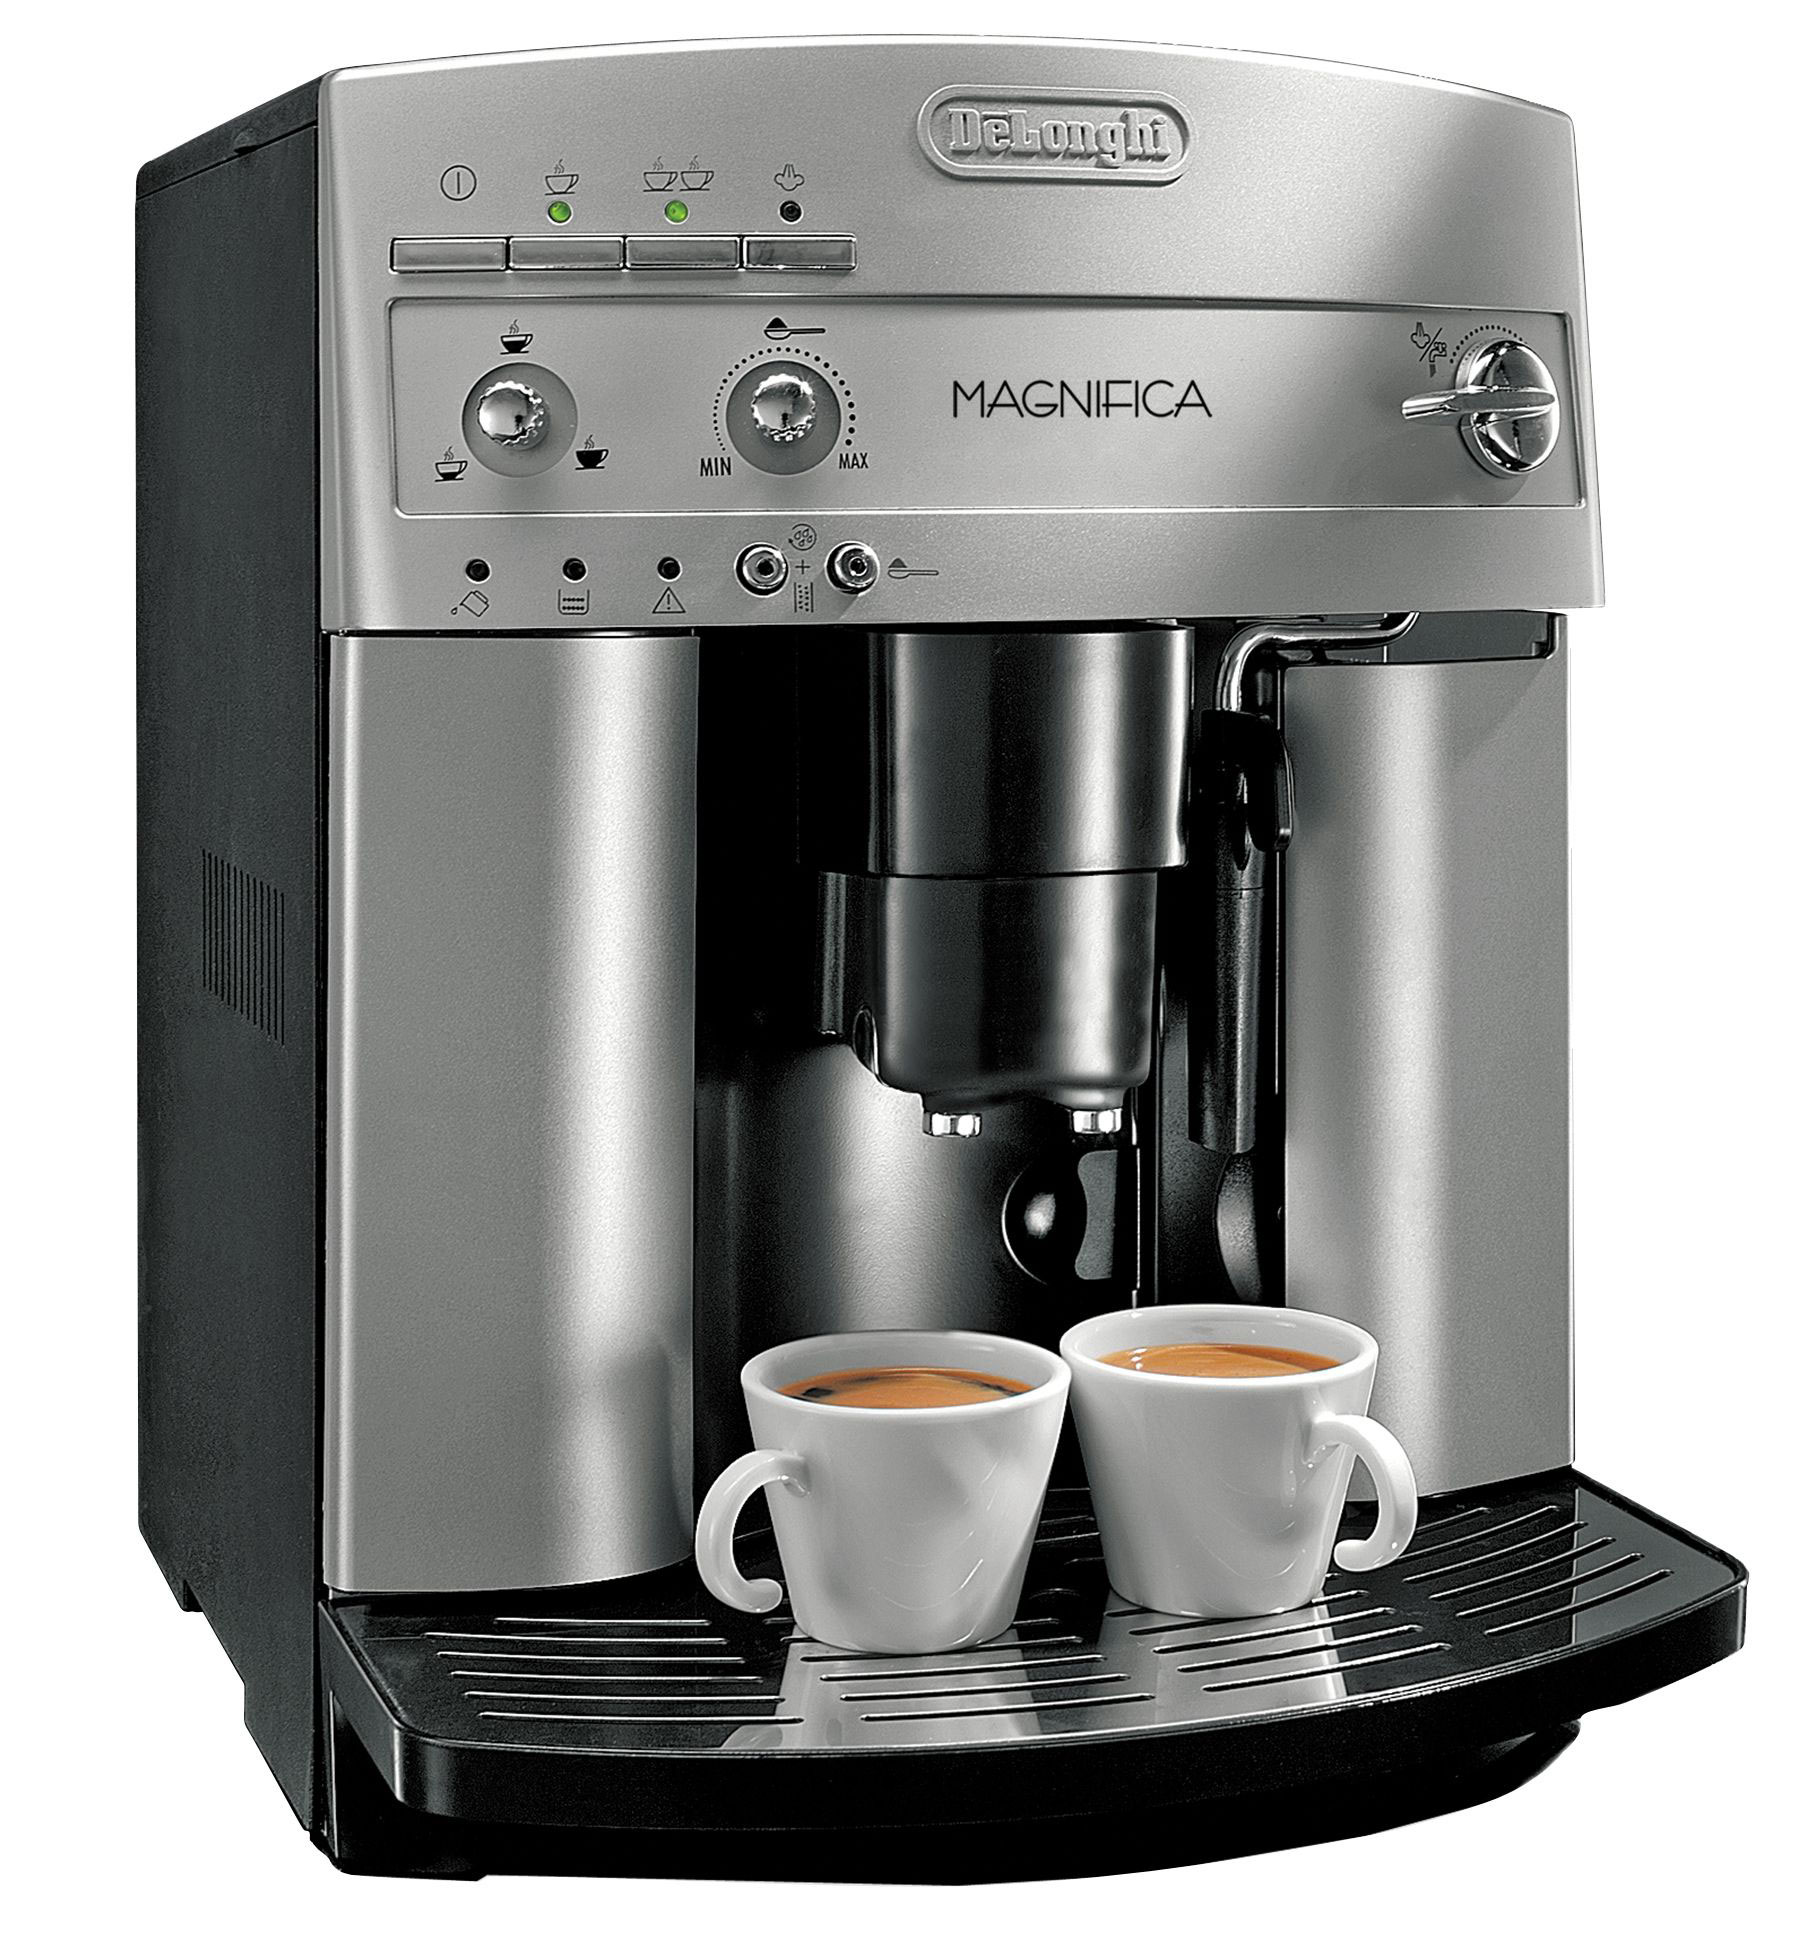 8 Best Coffee Maker with Grinder Reviews 2017 CM List